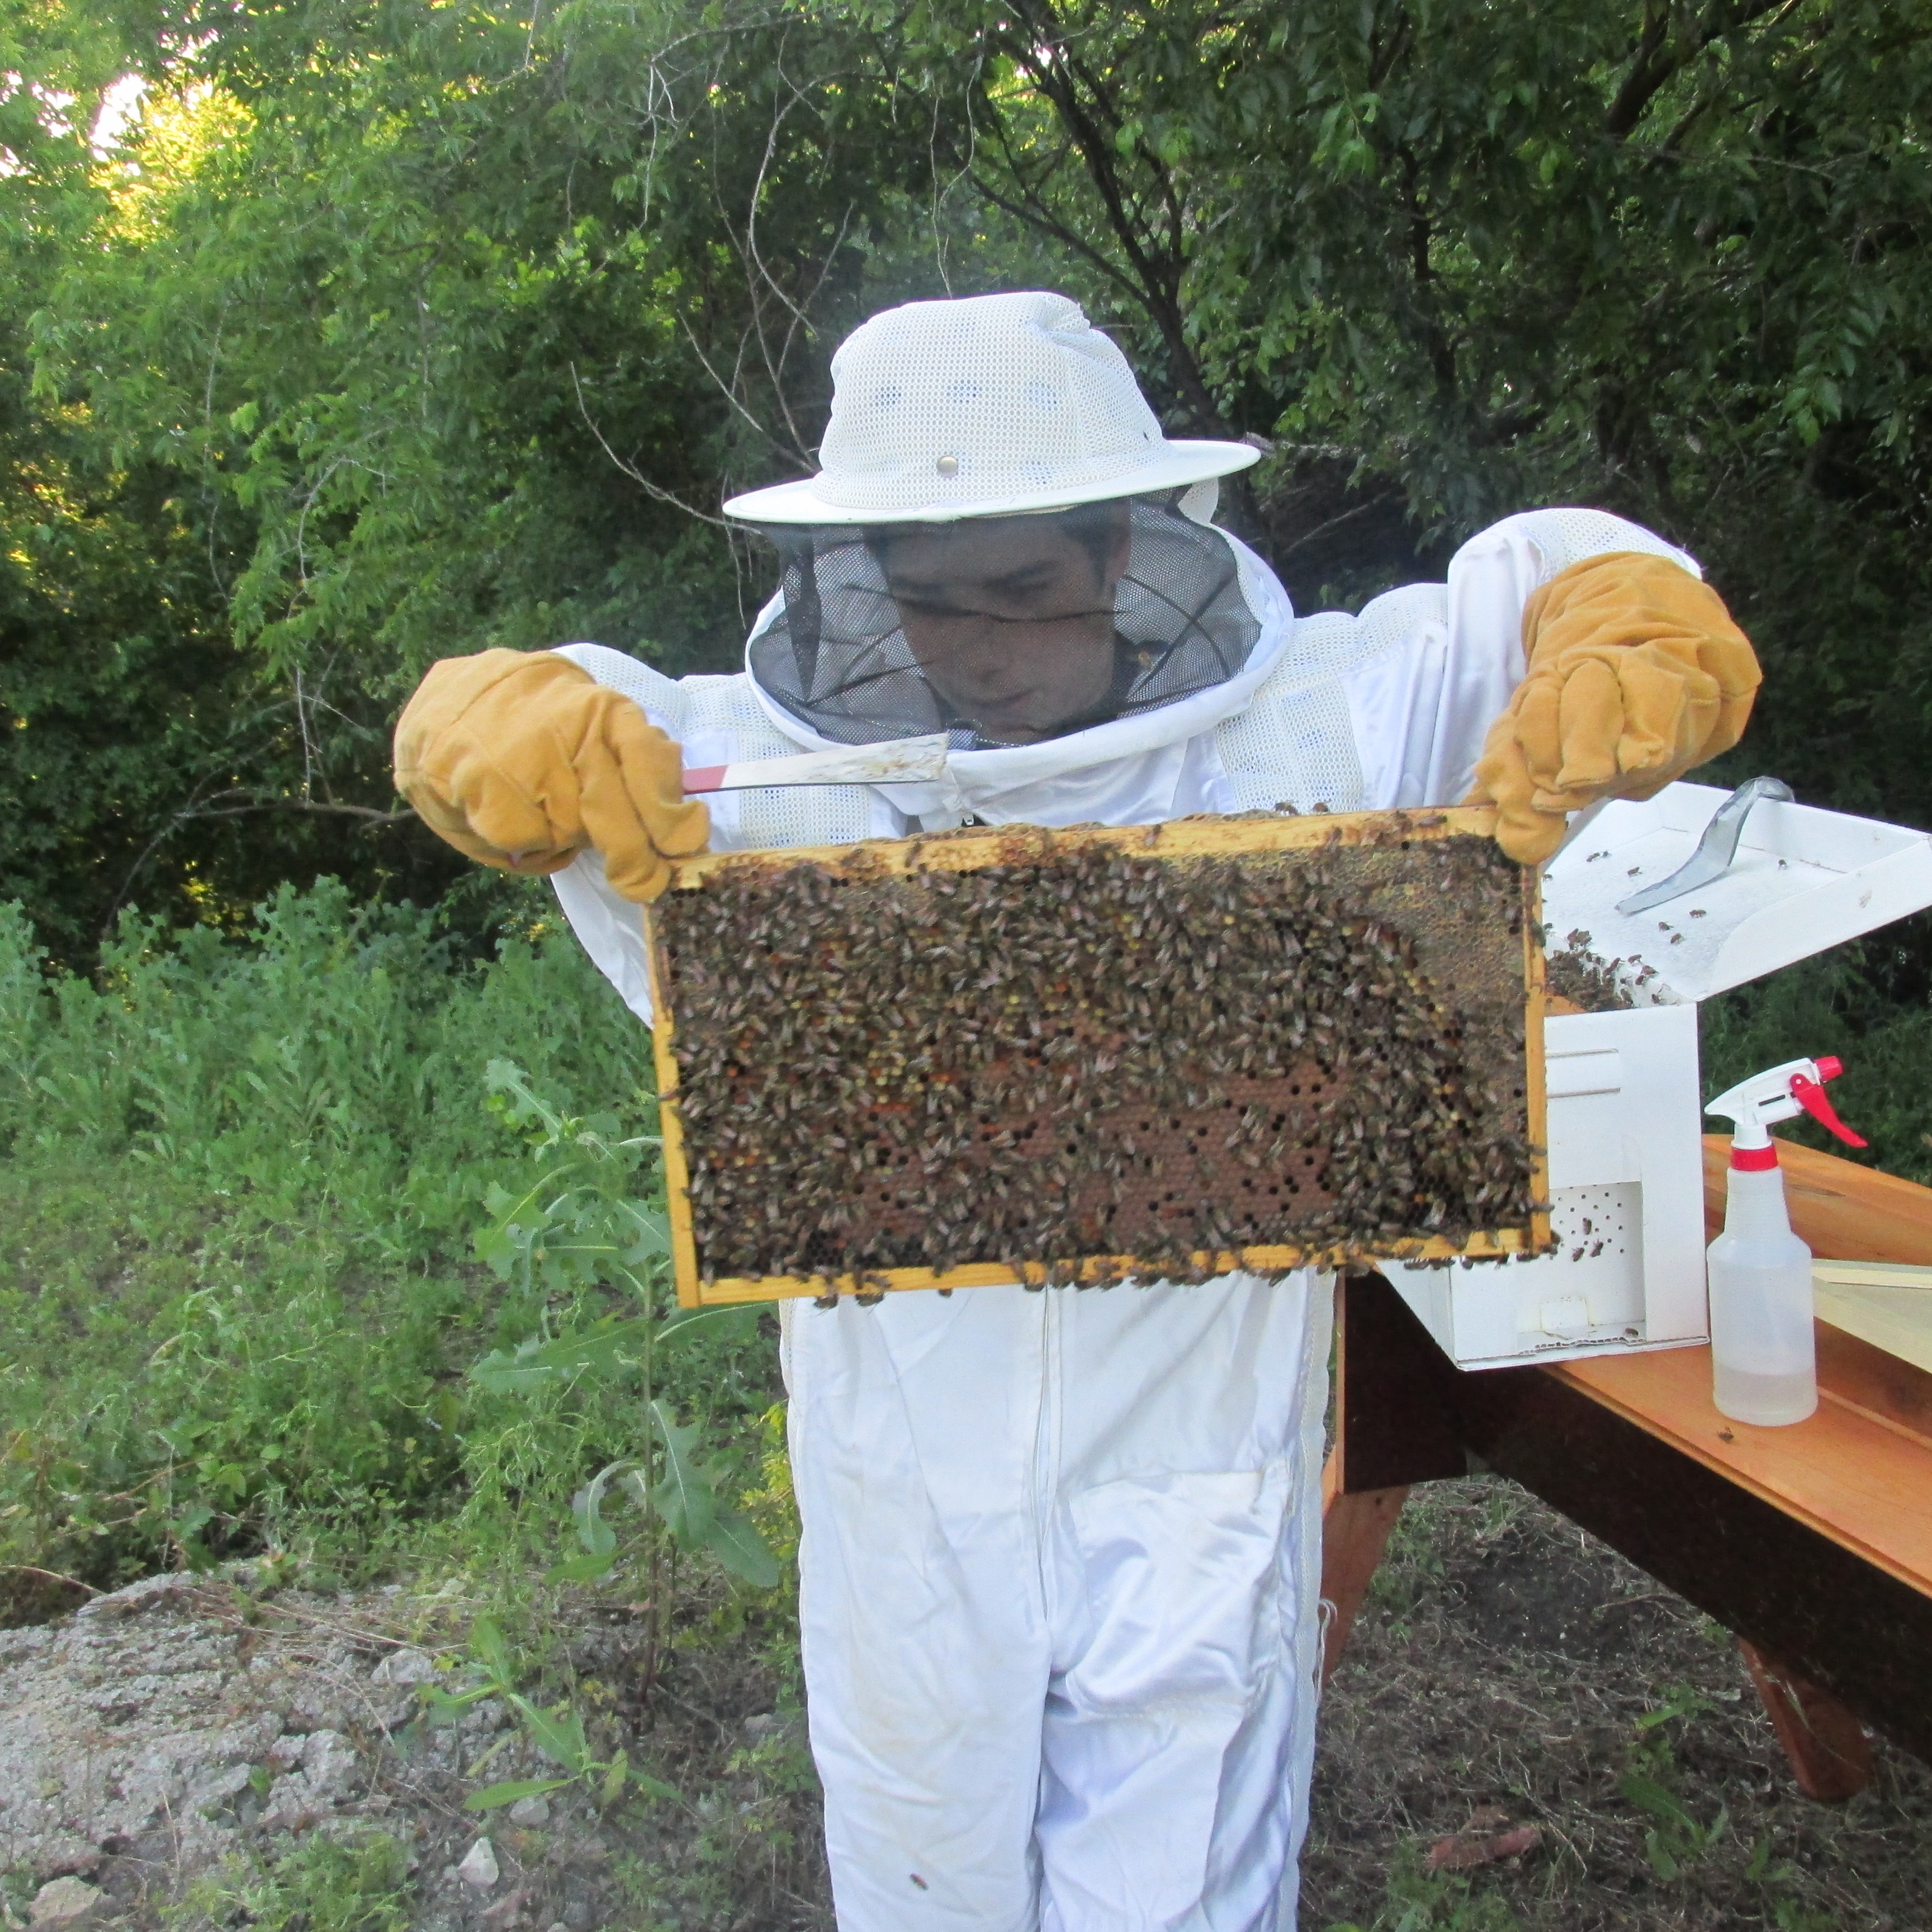 We are Bee Keepers! See the Start of Our “Newbee” Adventure!